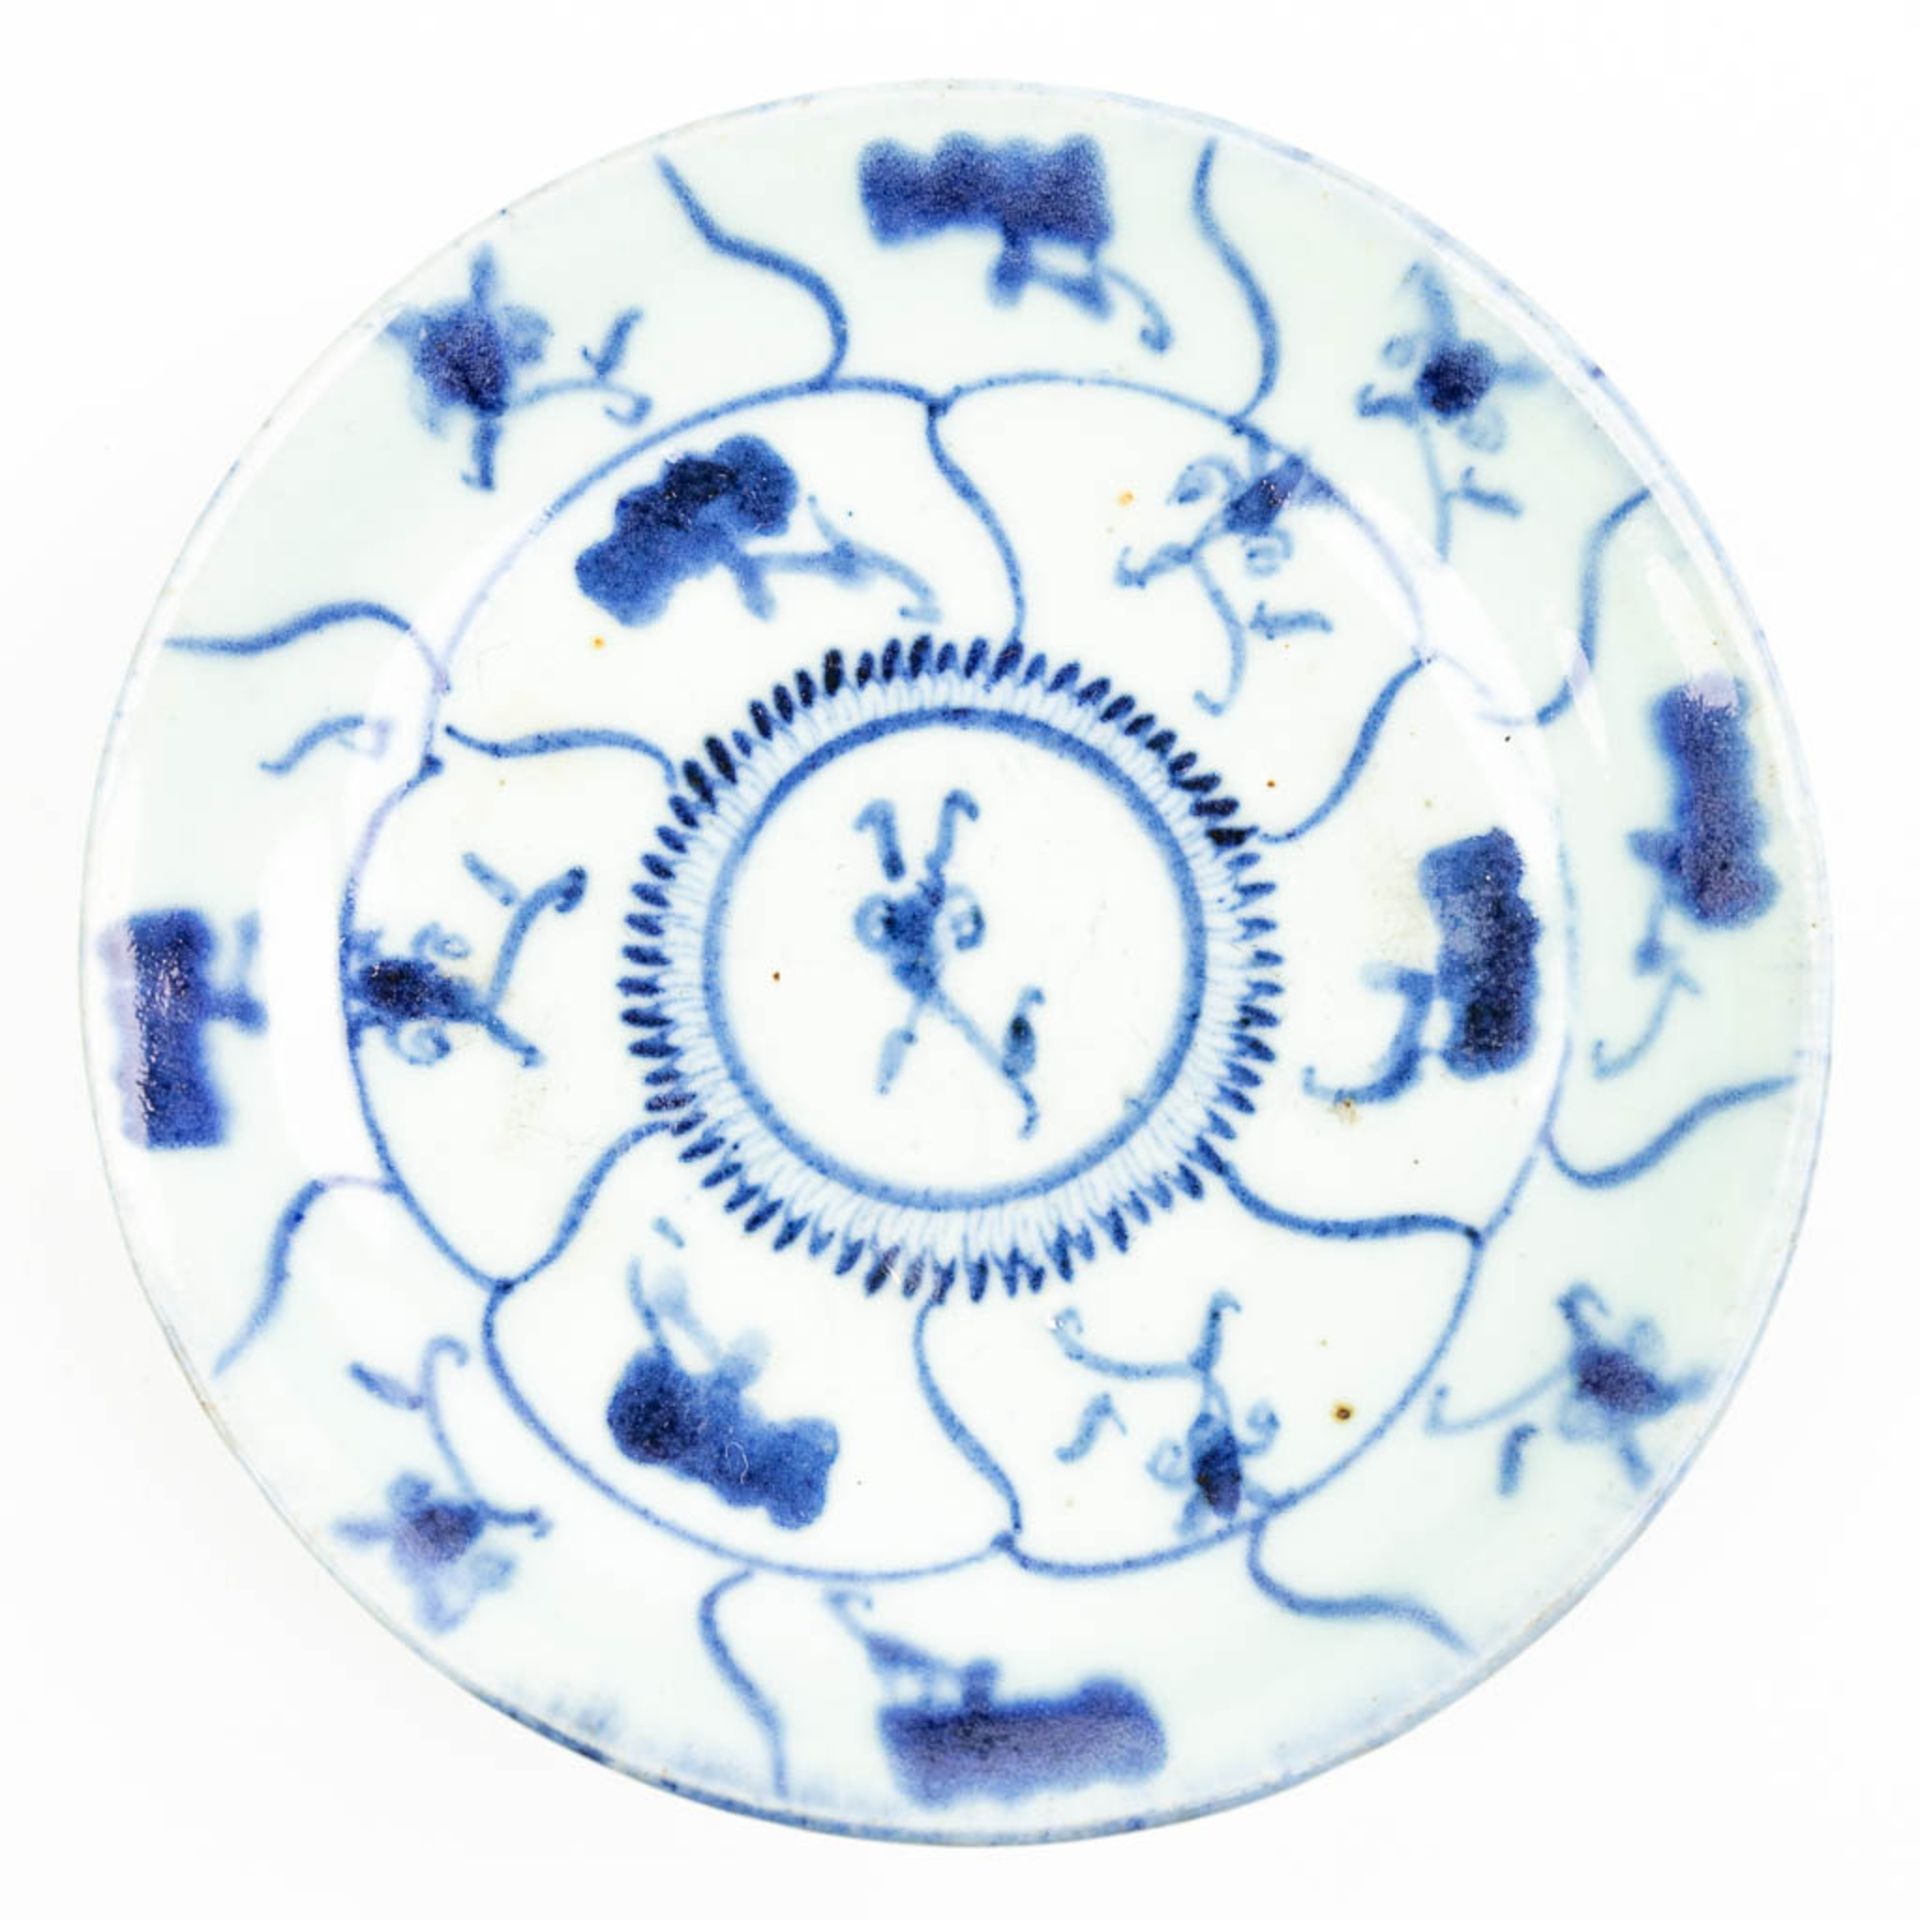 A collection of 5 plates made of Chinese porcelain with different patterns. - Image 9 of 15